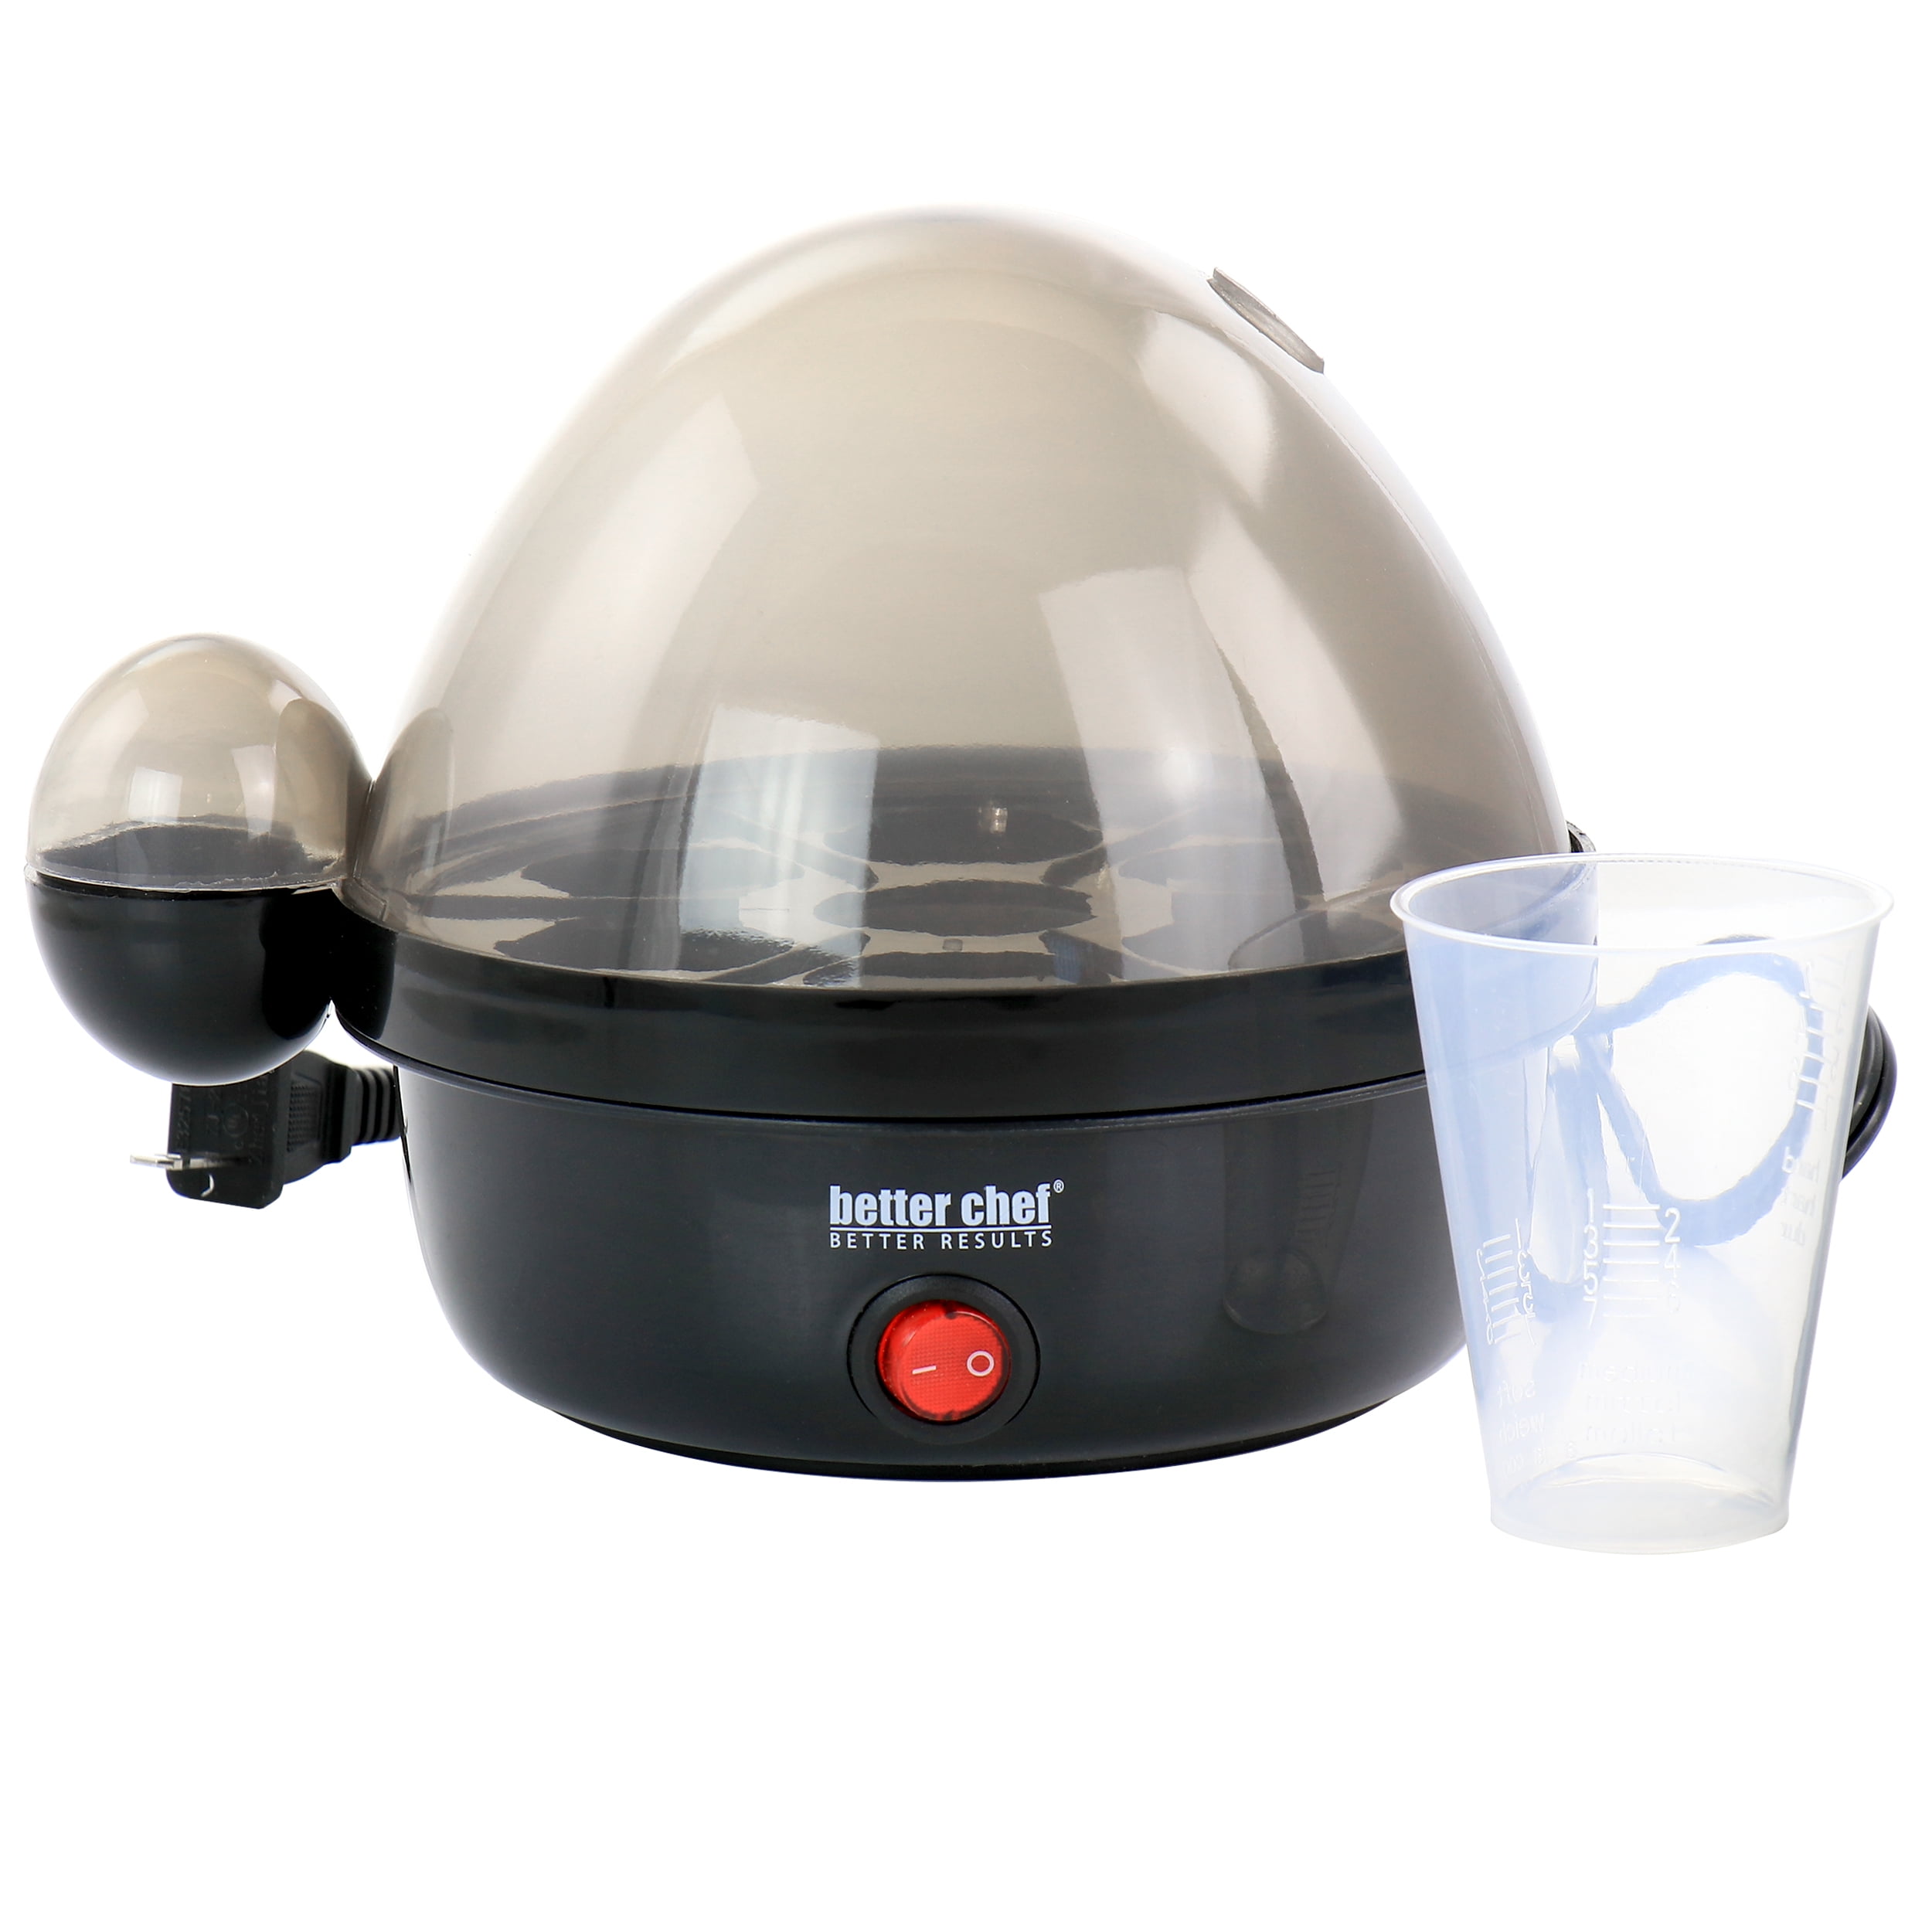 Better Chef 7-Egg Electric Cooker in - Walmart.com